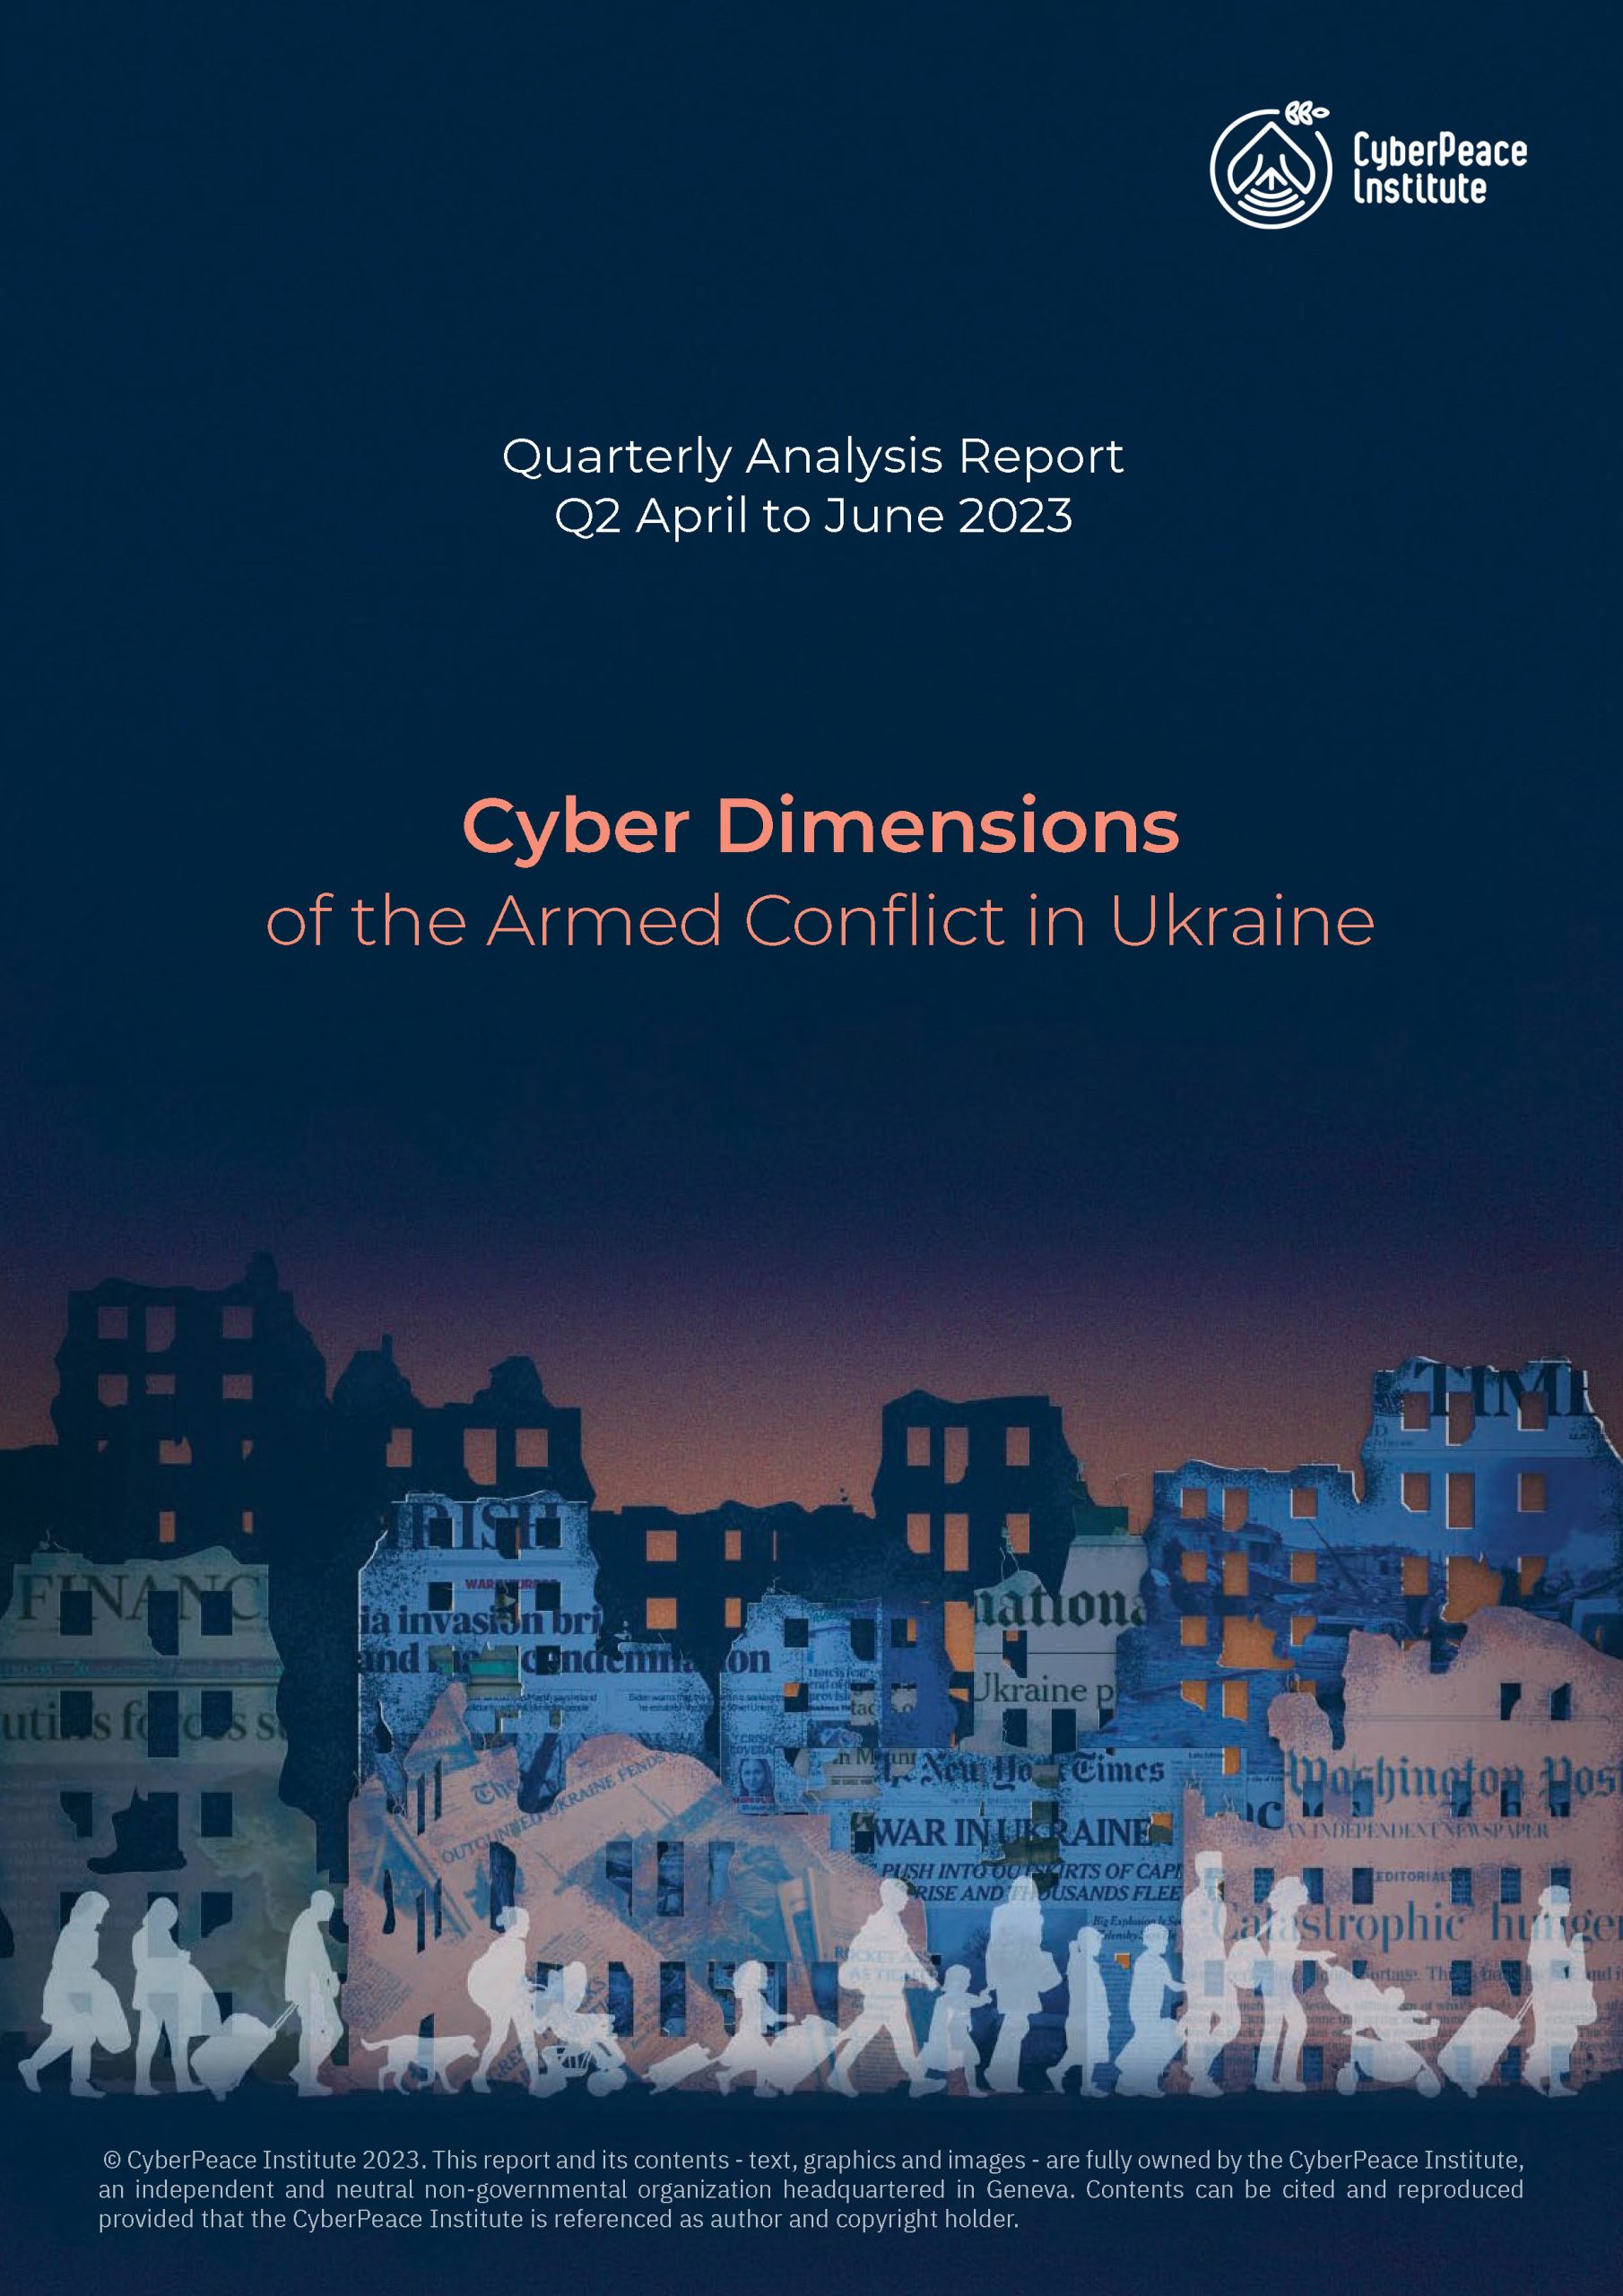 Cyber Dimensions of the Armed Conflict in Ukraine – Q2 2023